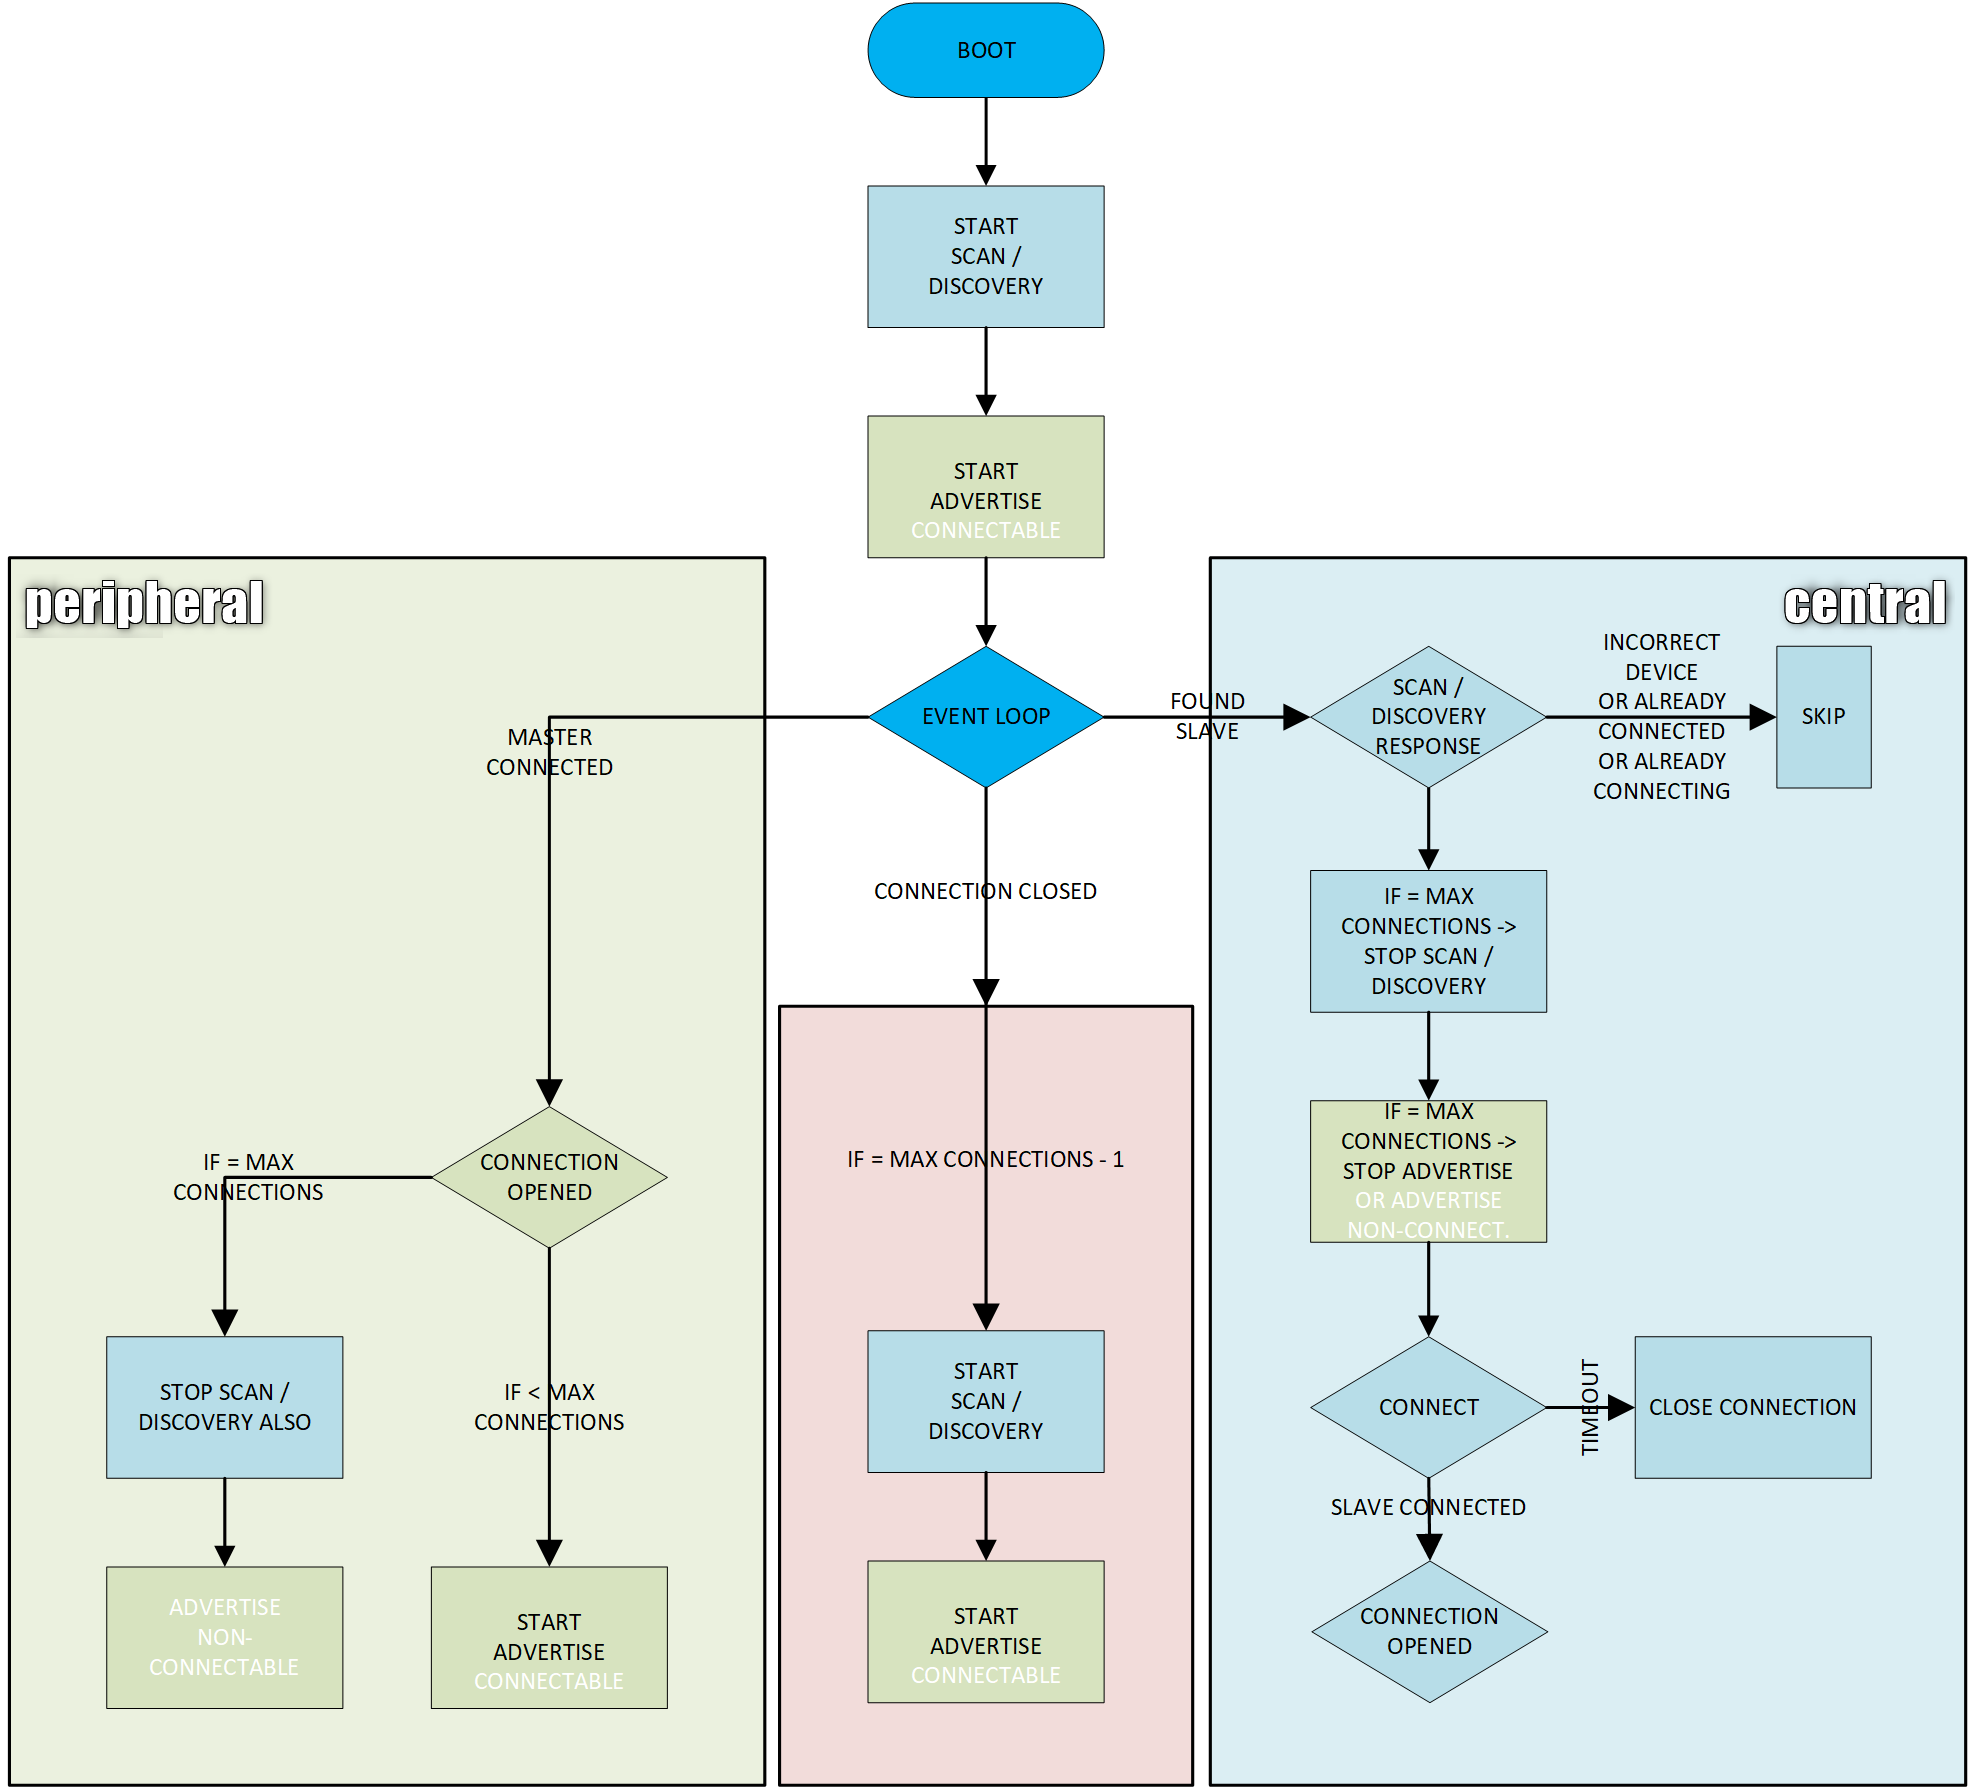 Flowchart for Simultaneous Scanning and Advertising